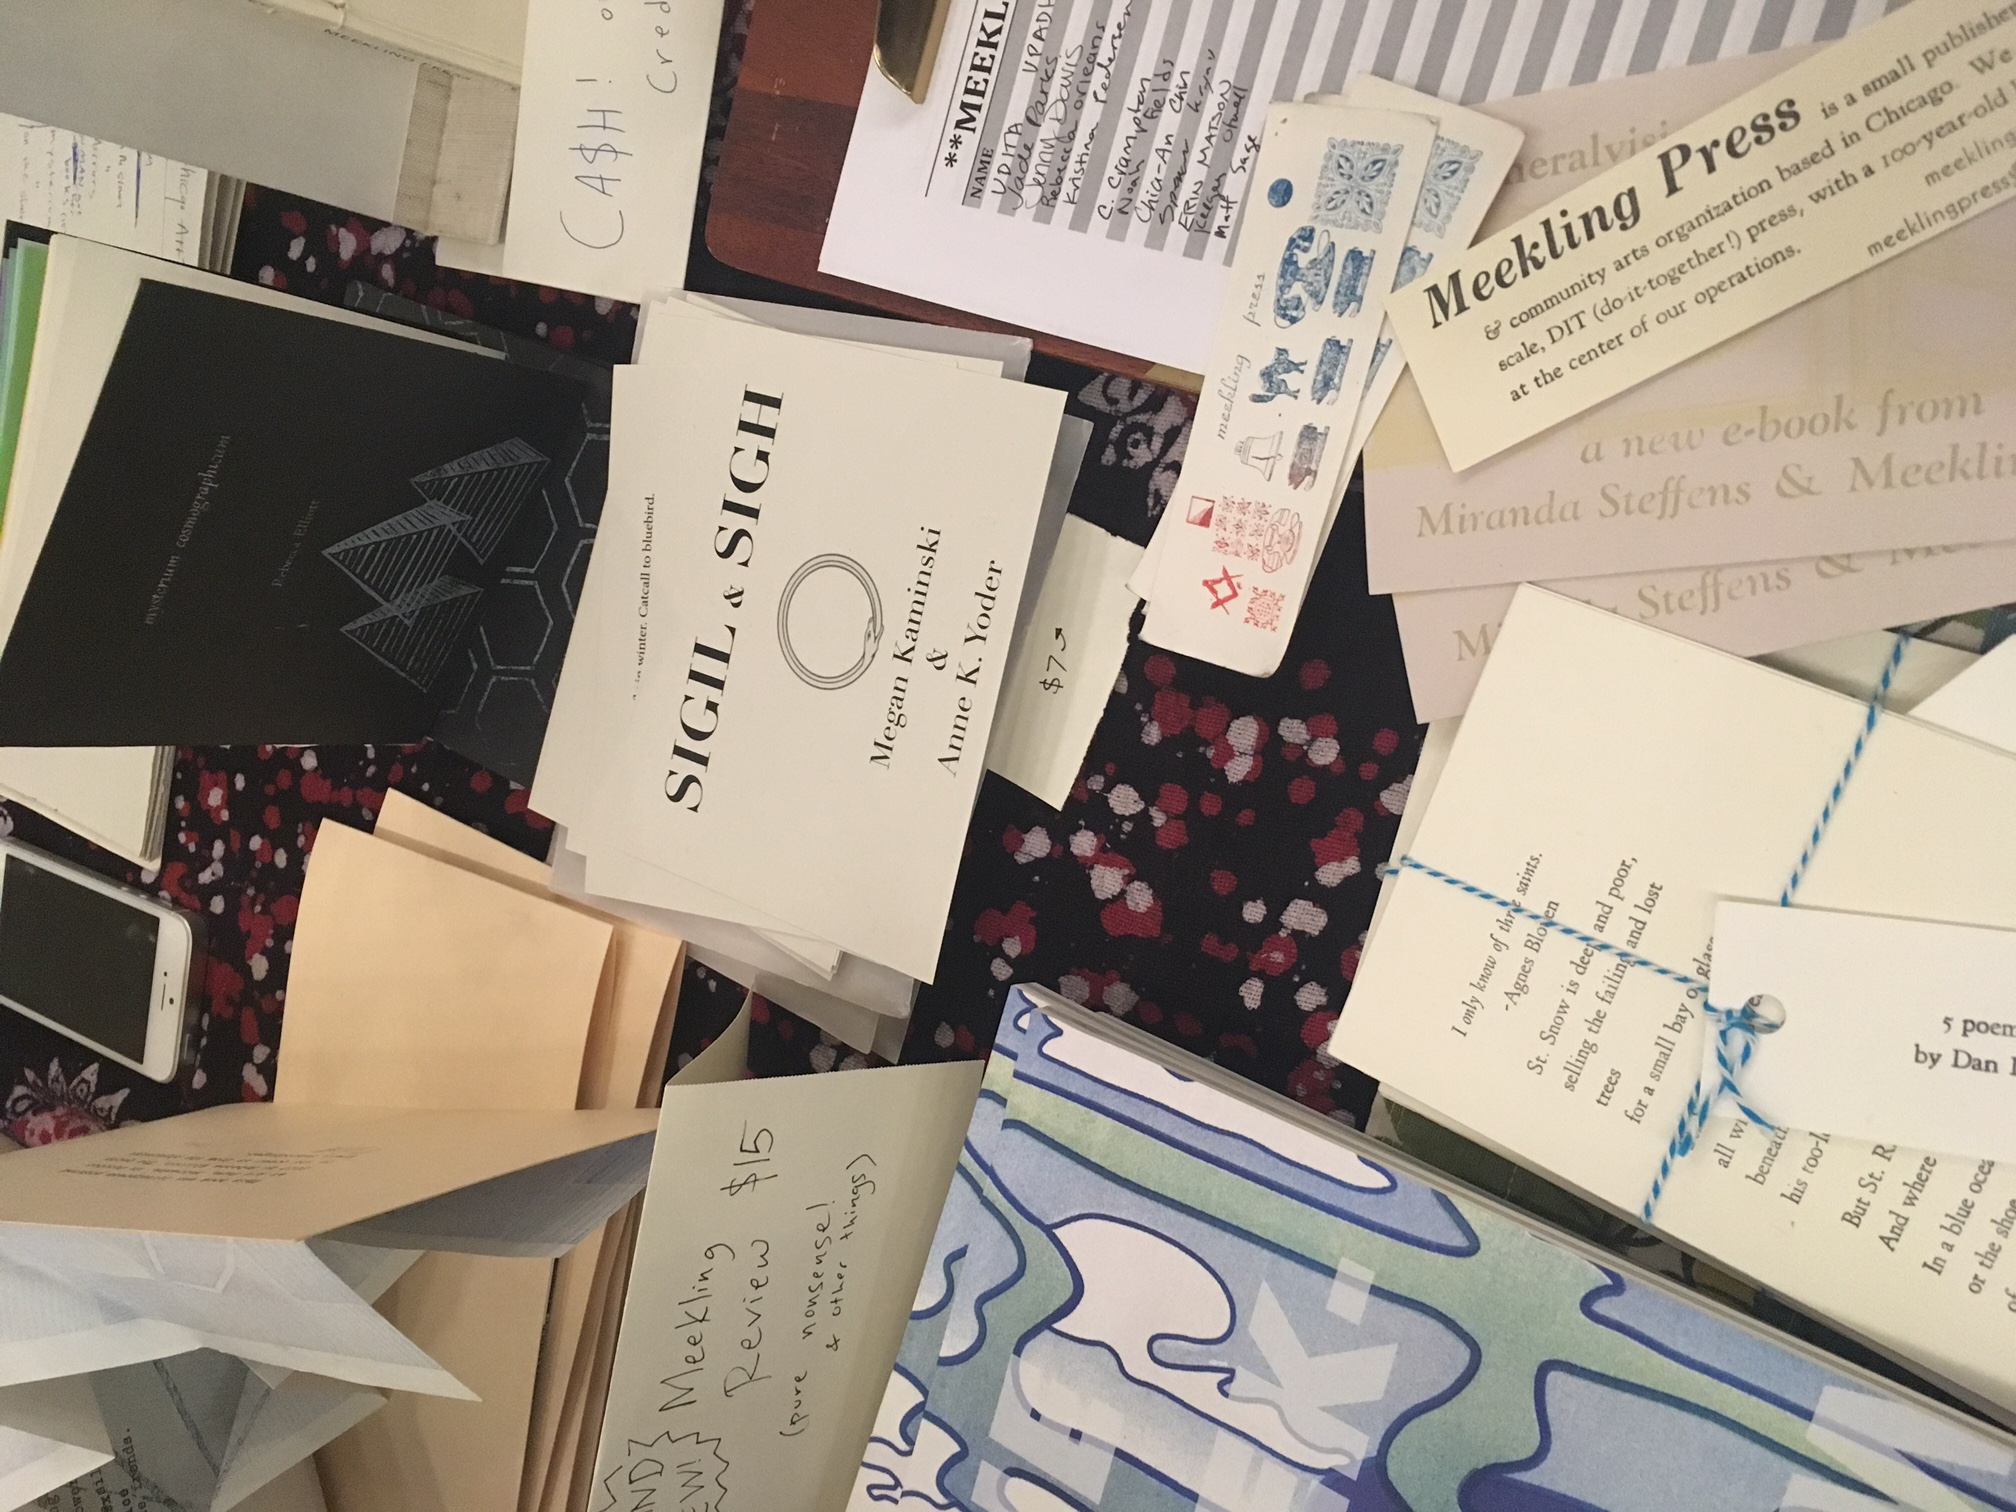 Items from the Meekling Press table at the Chicago Art Book Fair.